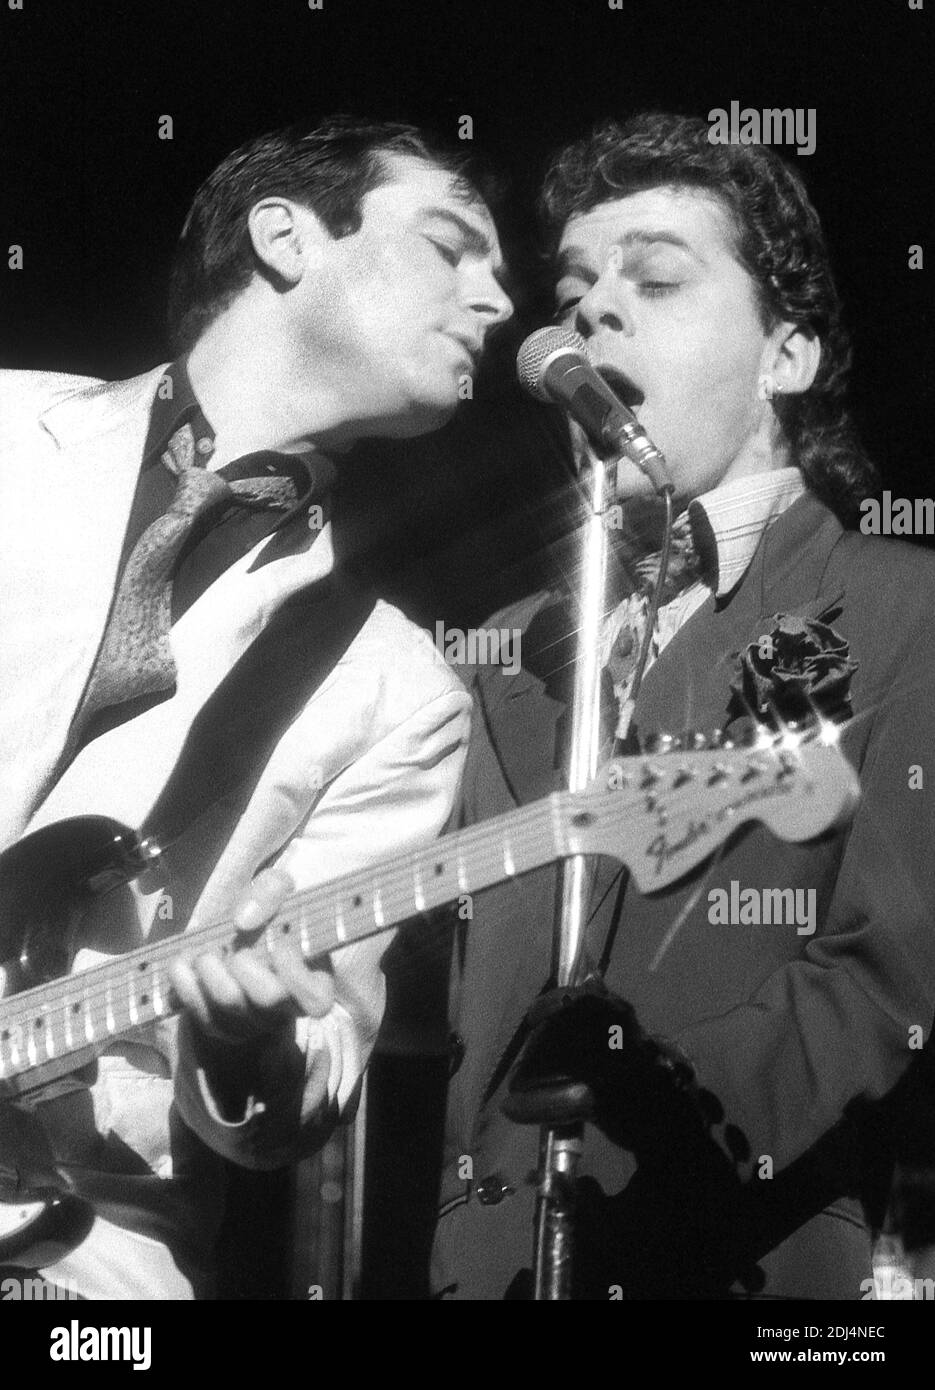 Kilburn and the High Roads. British Pub Rock band featuring Ian Dury on lead vocals. Hammersmith Odeon 1975 Stock Photo